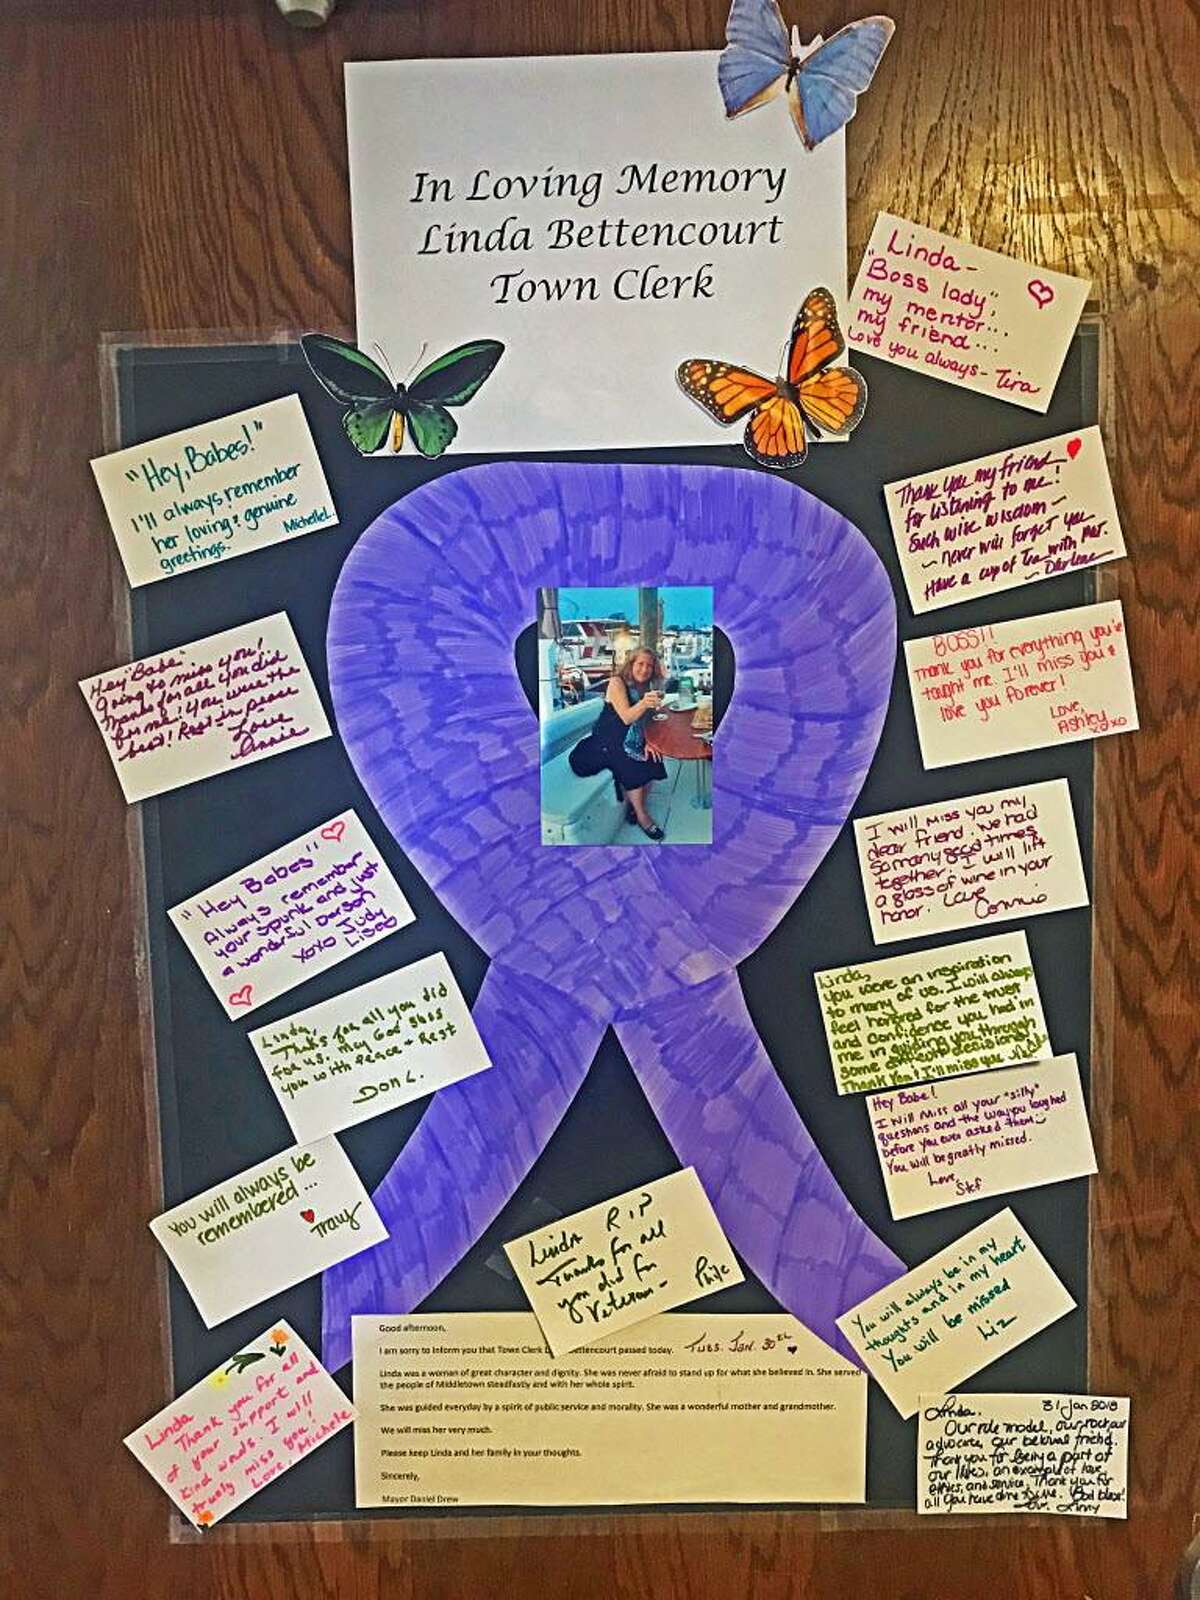 Middletown town clerk Linda Bettencourt died Tuesday at home. Her coworkers created a poster in memory of the lifelong city resident. Wednesday, people stopped by the office in City Hall to share their recollections.